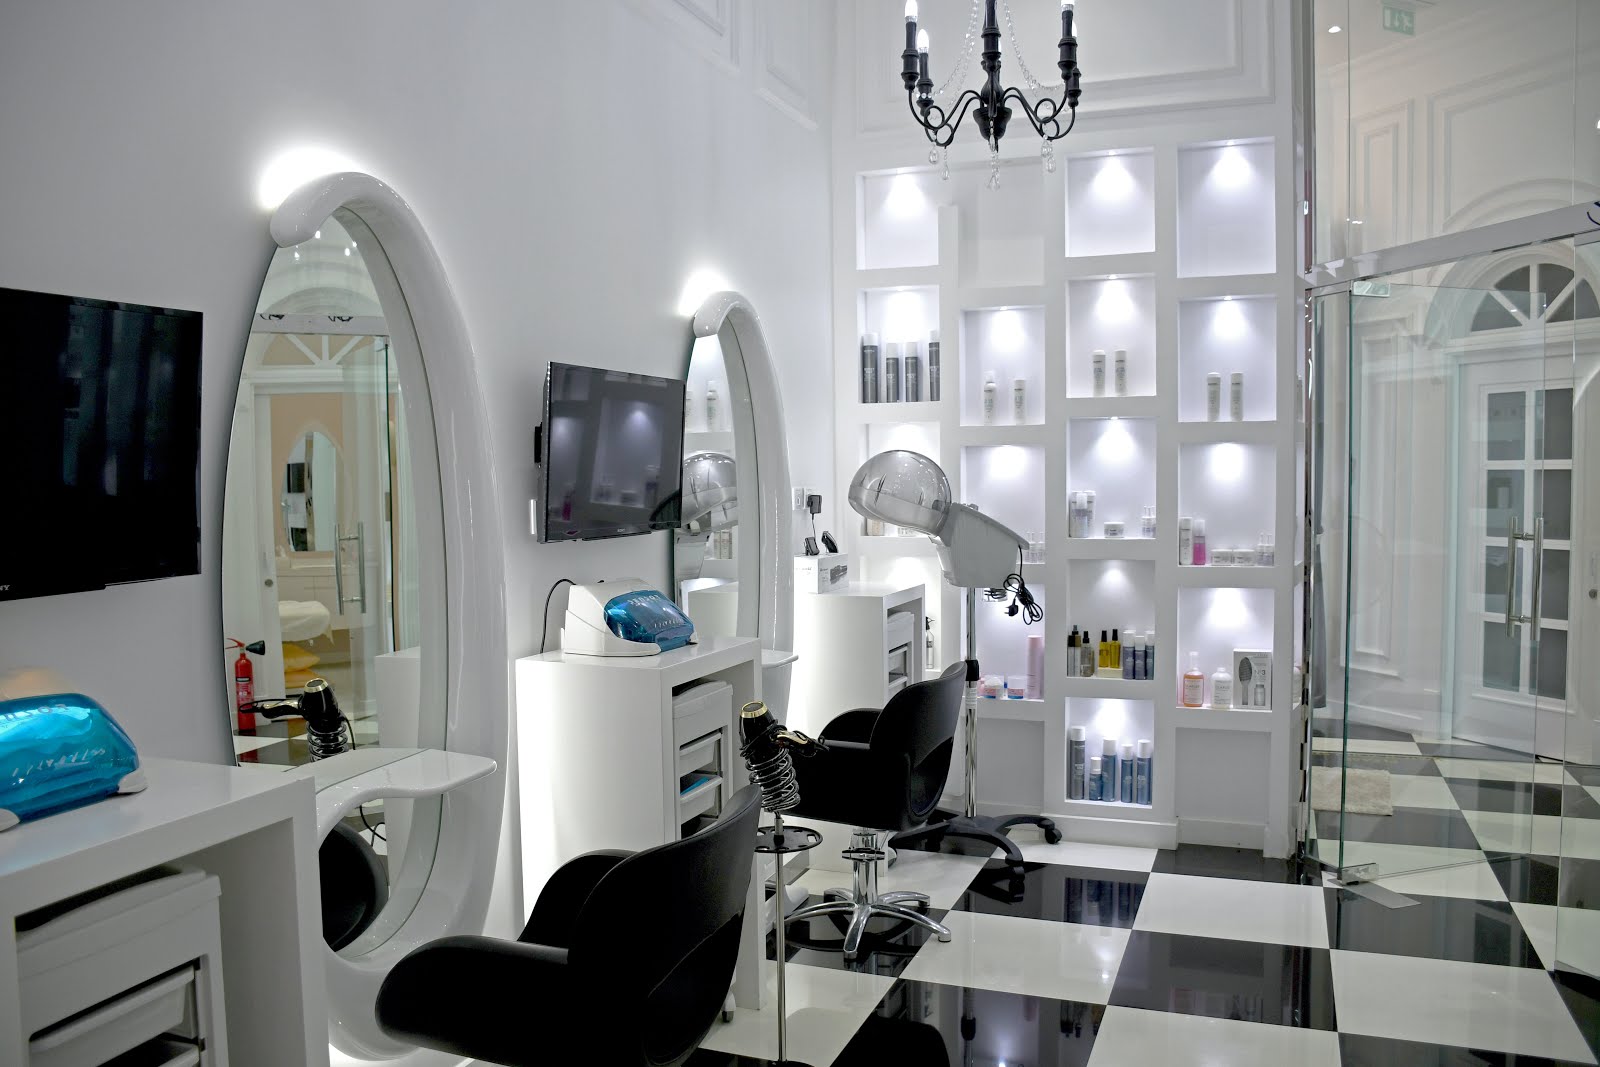 "My Salon Core: Your One-Stop Shop for Professional Beauty Products"